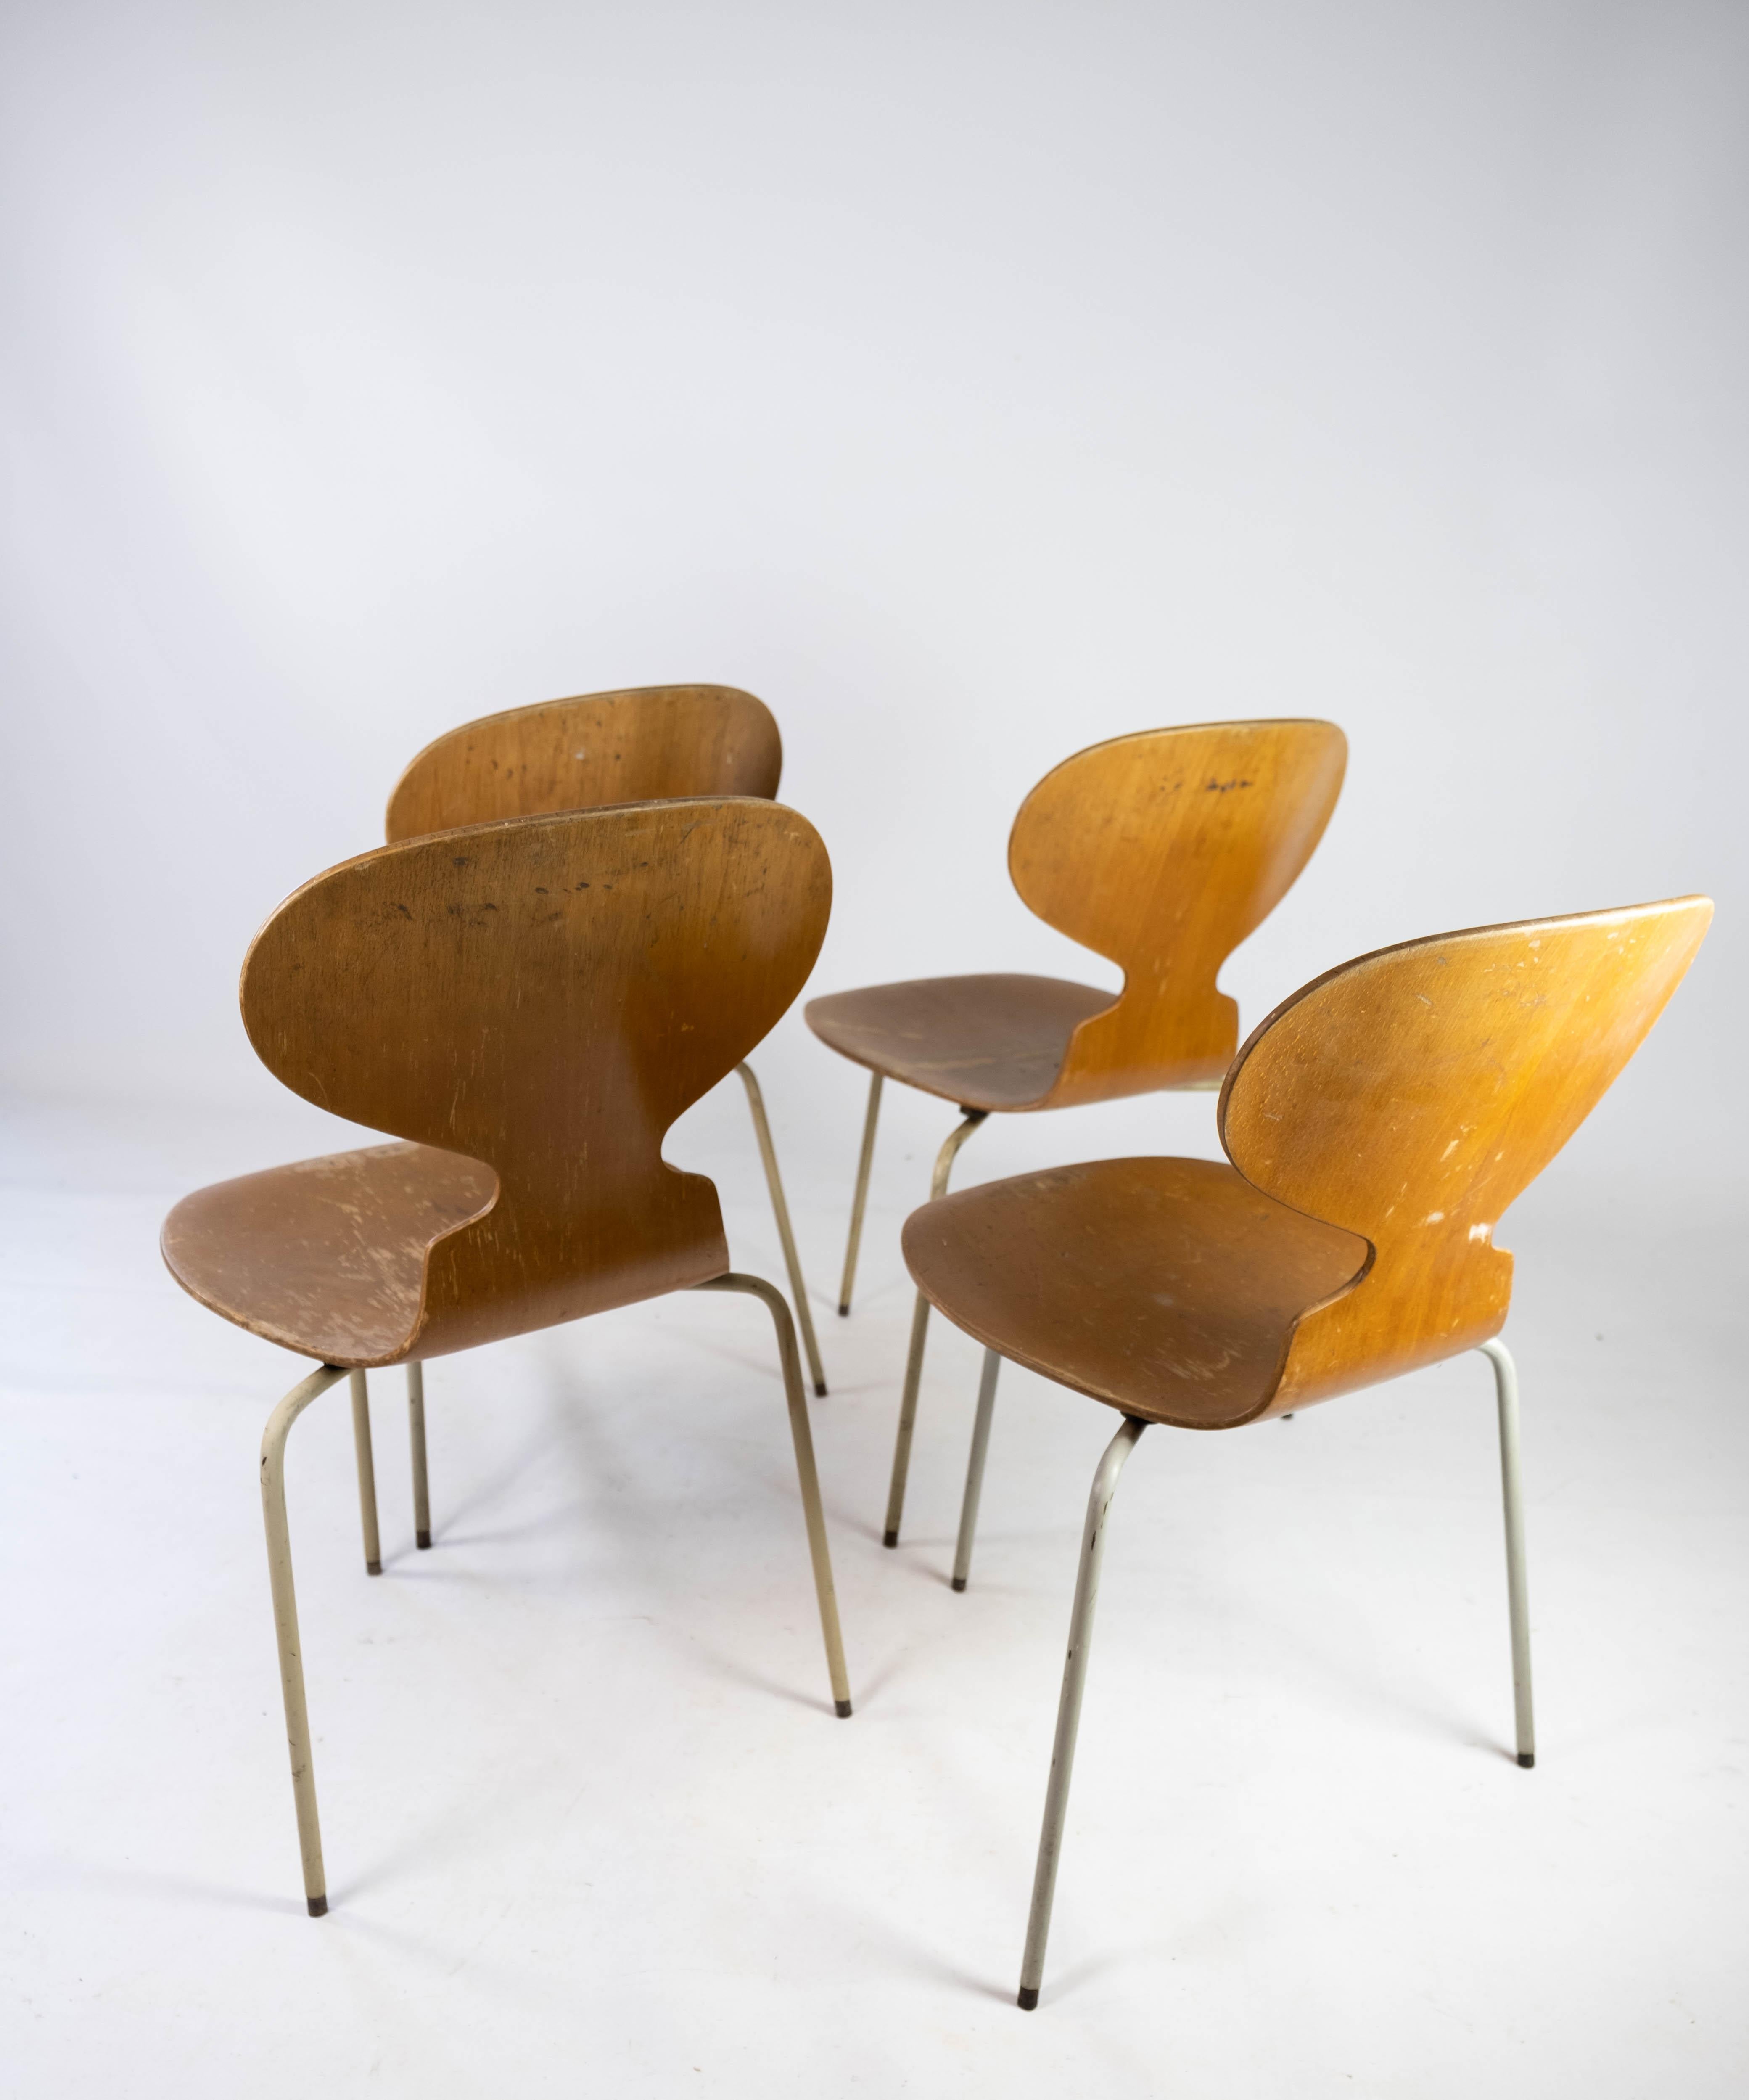 Metal Set of Four Ant Chairs, Model 3101, in Light Wood, by Arne Jacobsen, 1950s For Sale